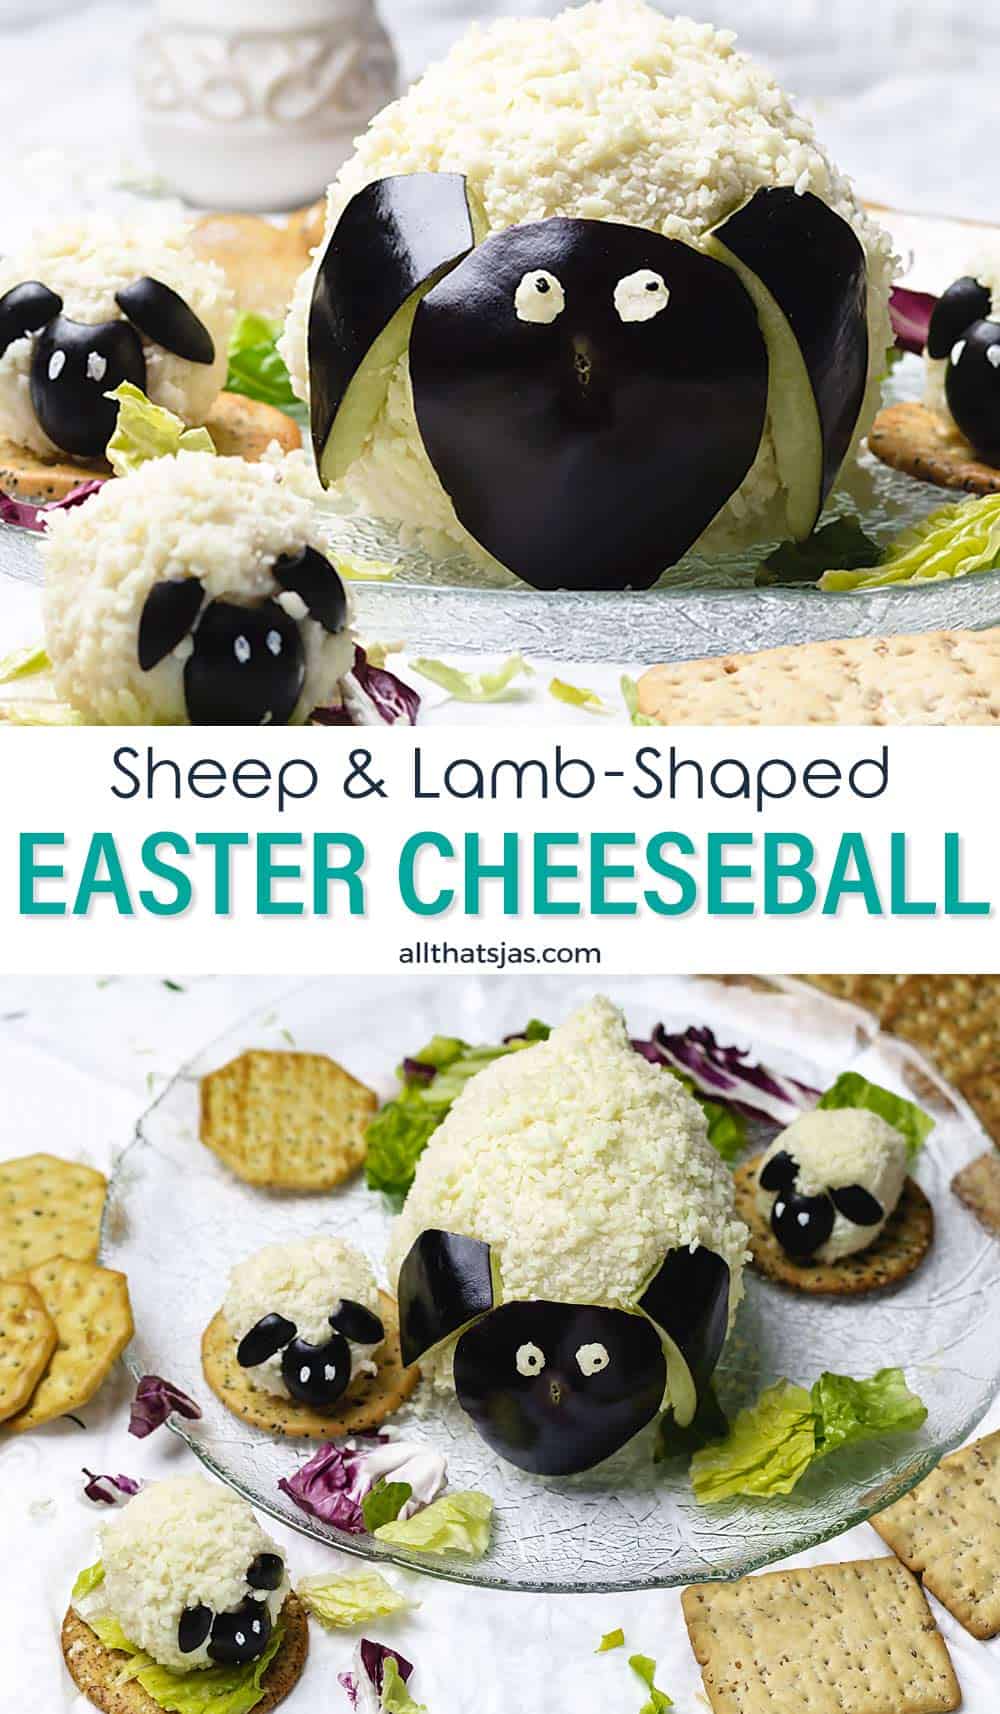 Two photo image of lamb and sheep Easter appetizer with text overlay in the middle.